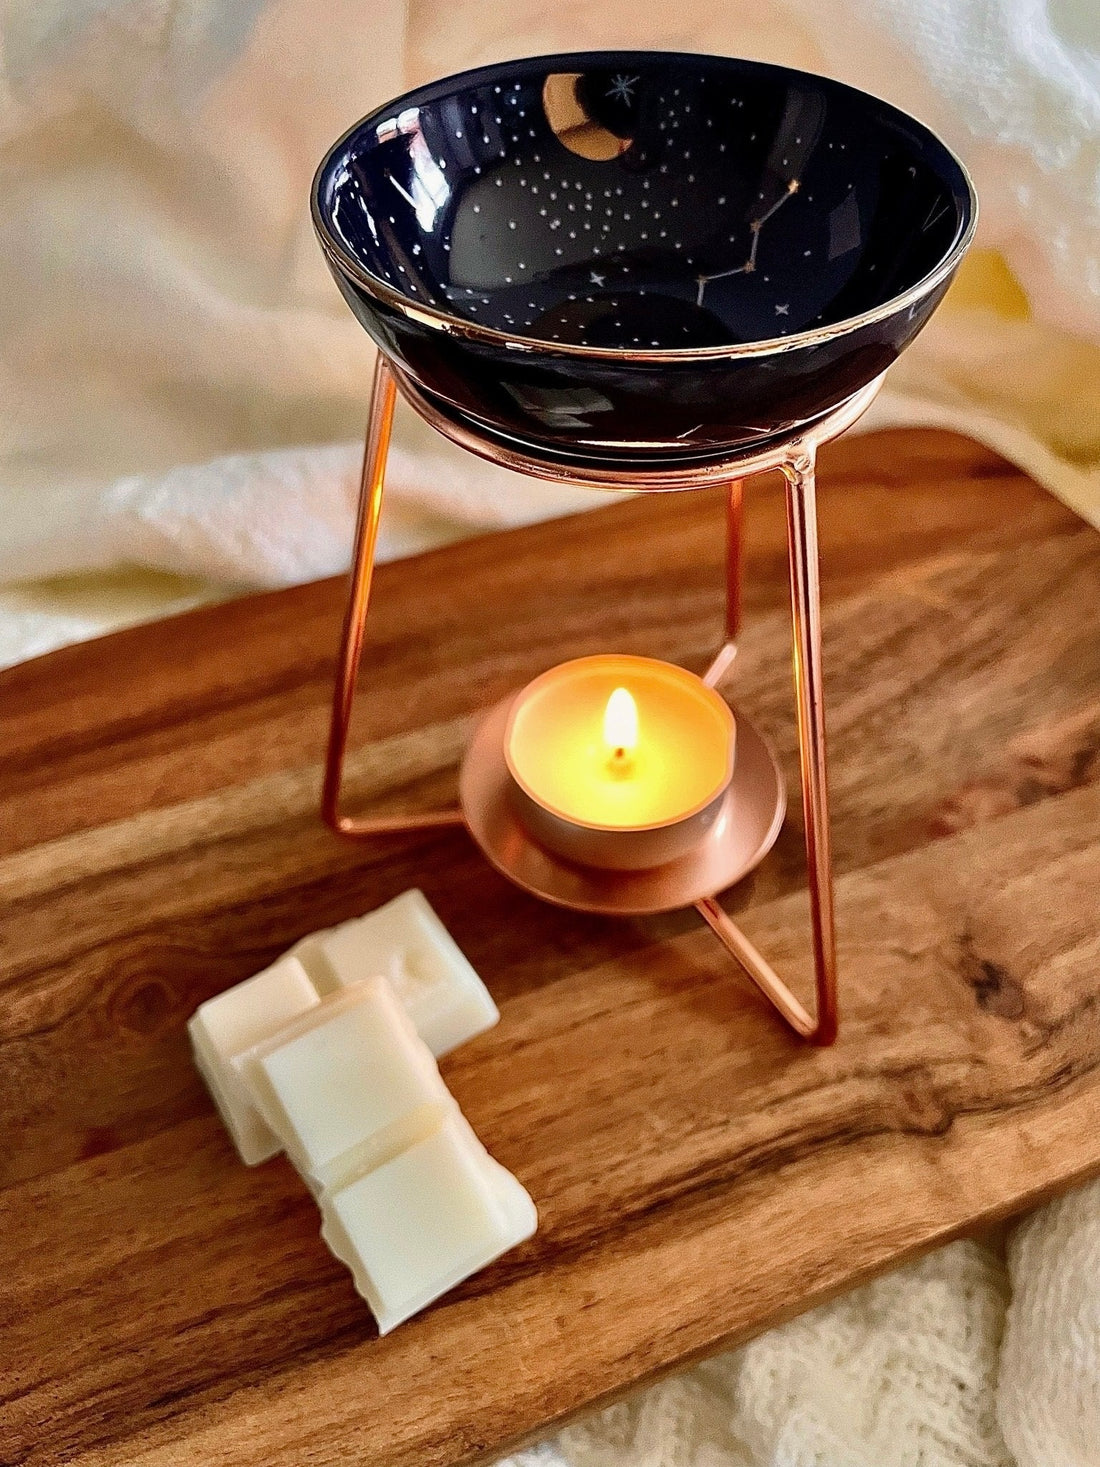 Celestial burner with rose gold stand